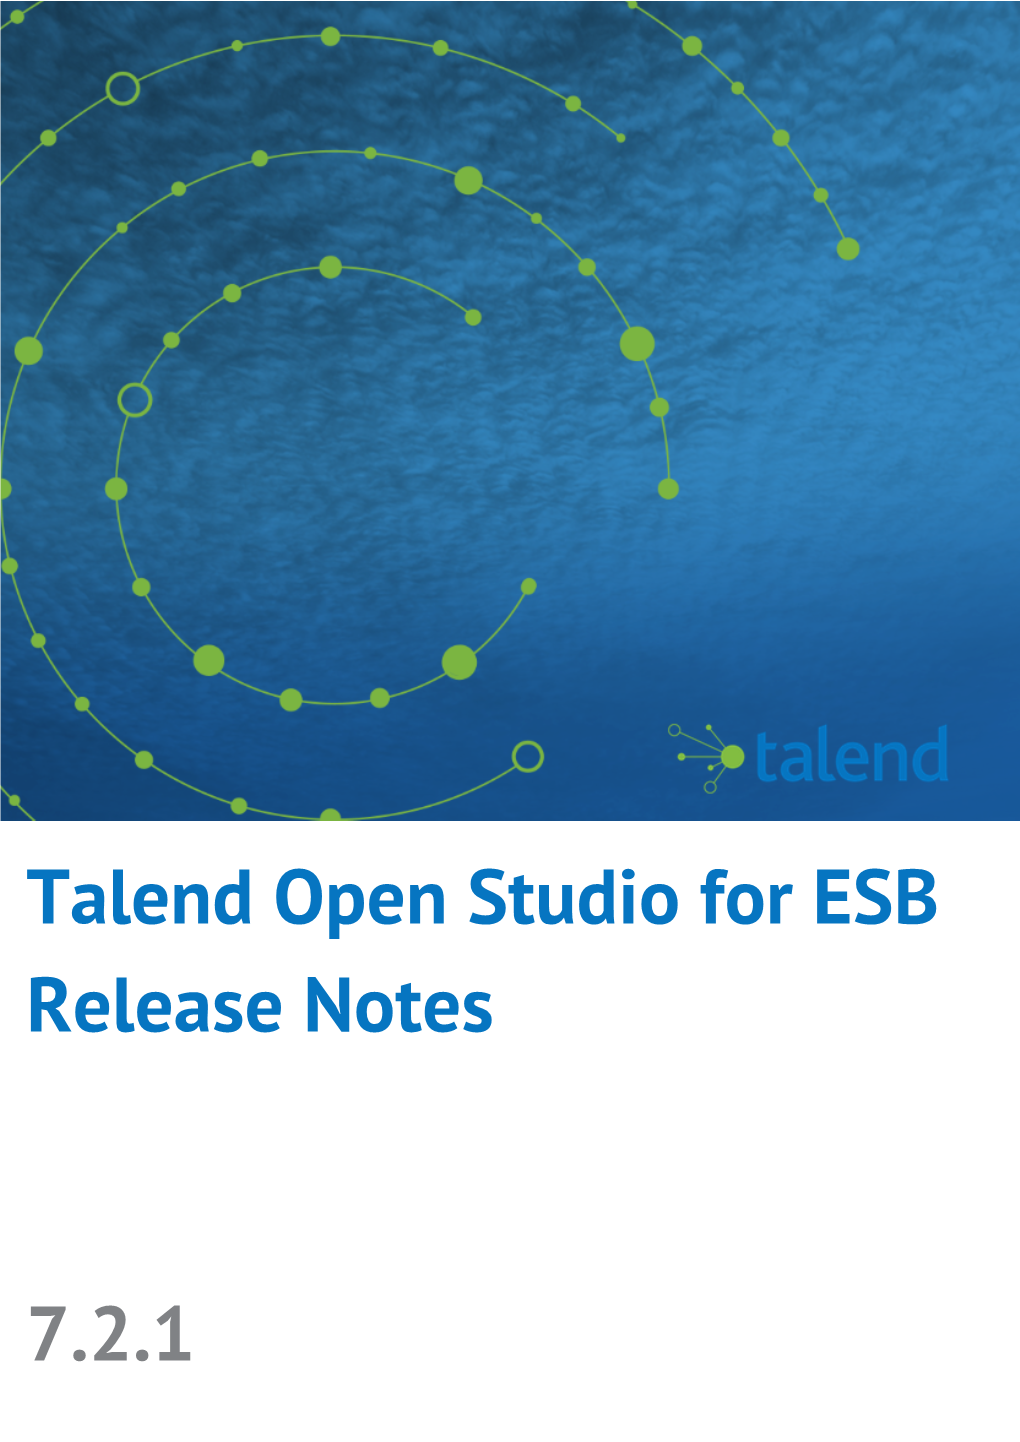 Talend Open Studio for ESB Release Notes